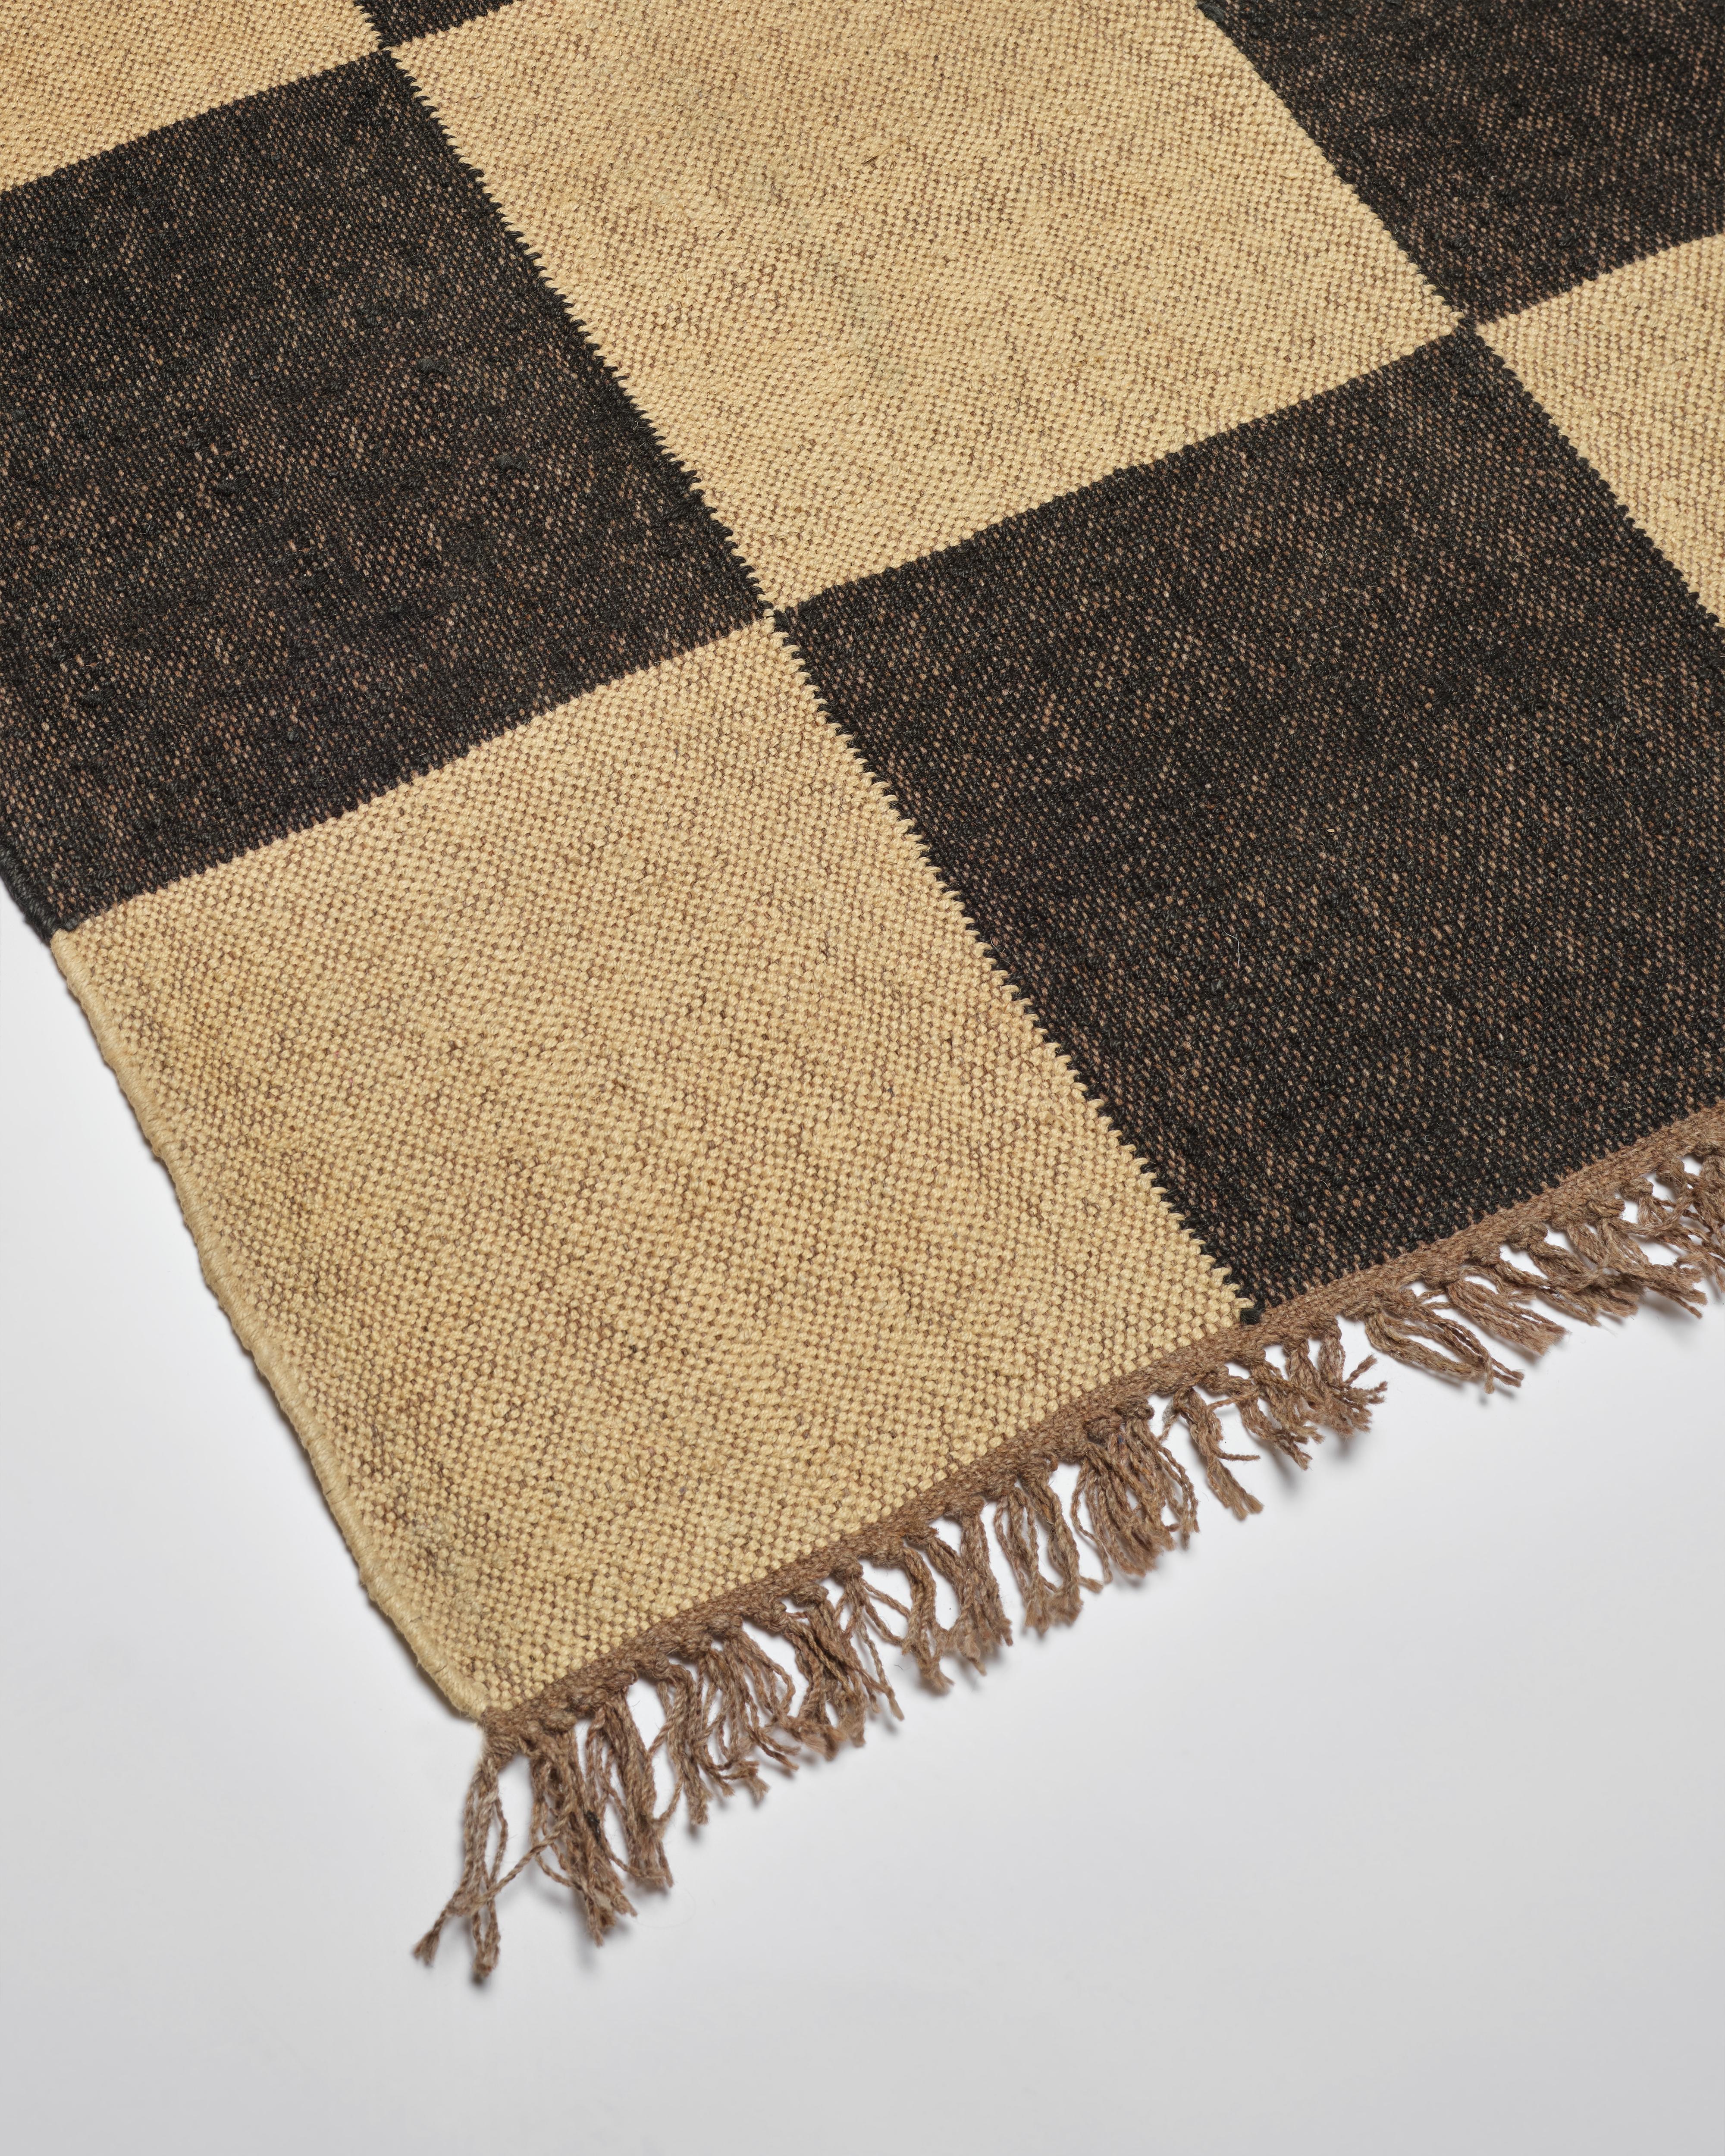 Our beautiful wool and jute checkerboard rugs are expertly handwoven in Jaipur, India. The checkerboard pattern and neutral off black & natural coloring are chic and sophisticated with a hint of bohemian cool. These bigger checks are approximately